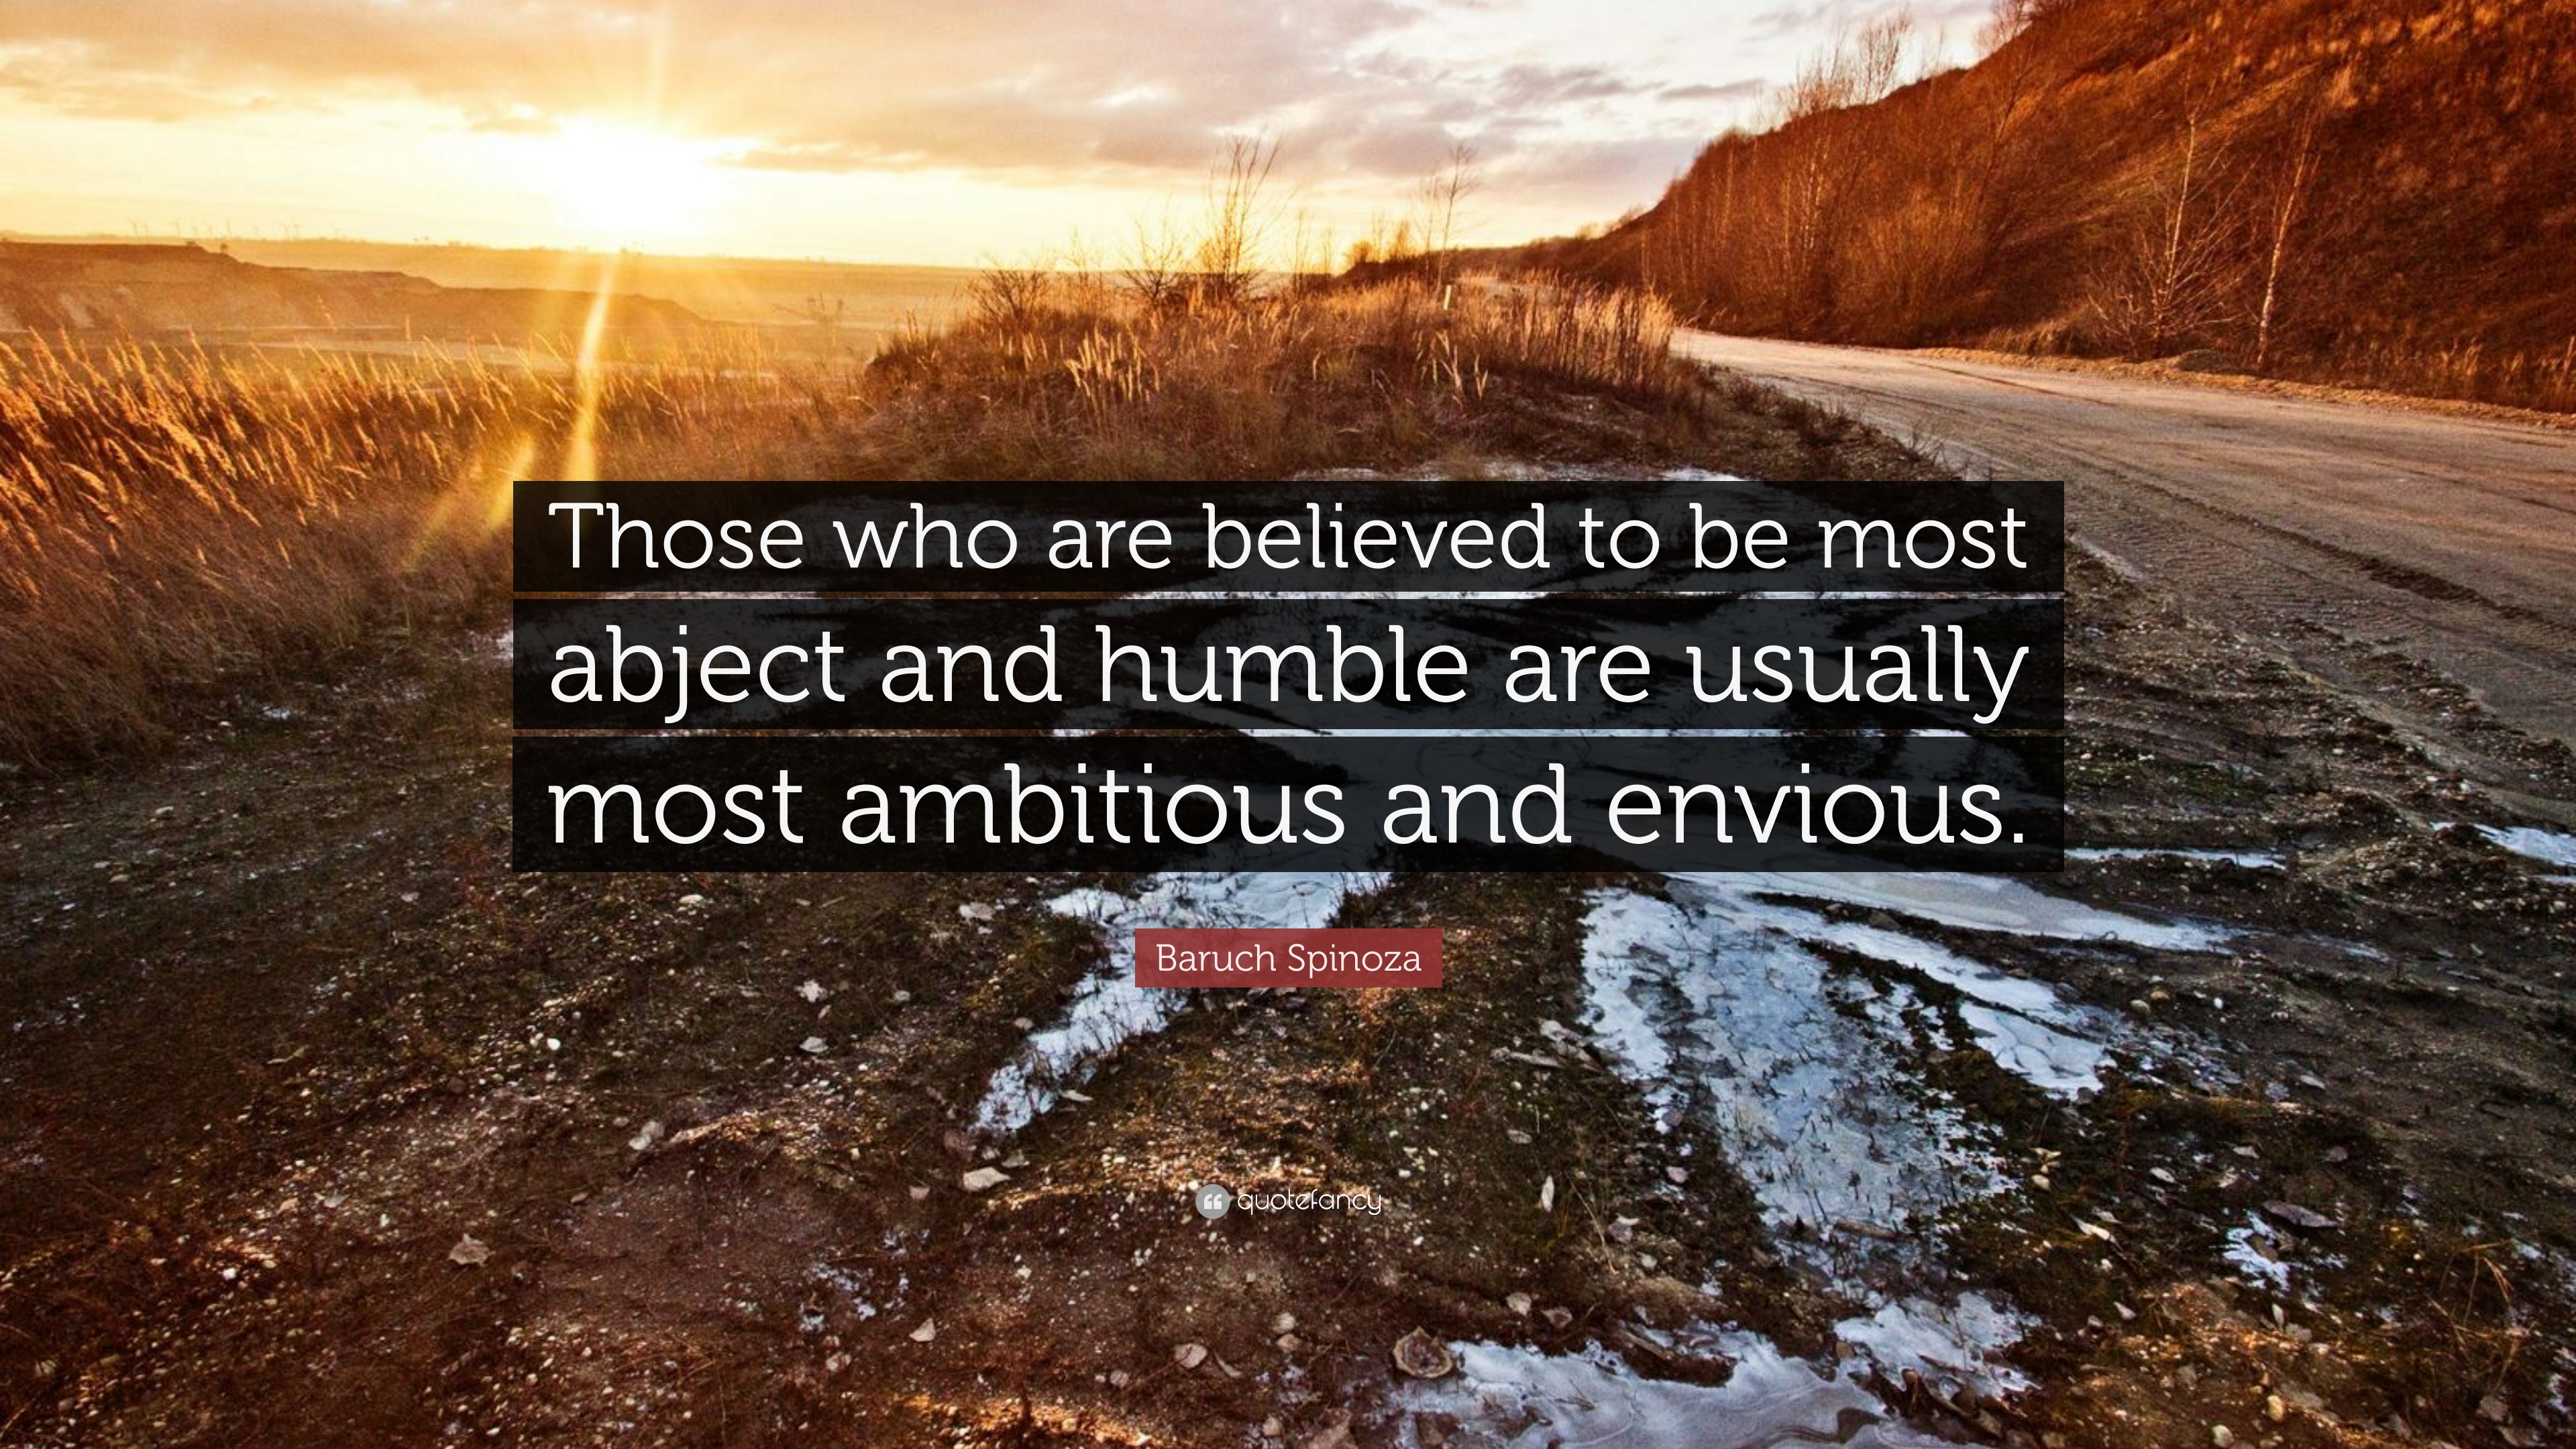 Baruch spinoza quote âthose who are believed to be most abject and humble are usually most